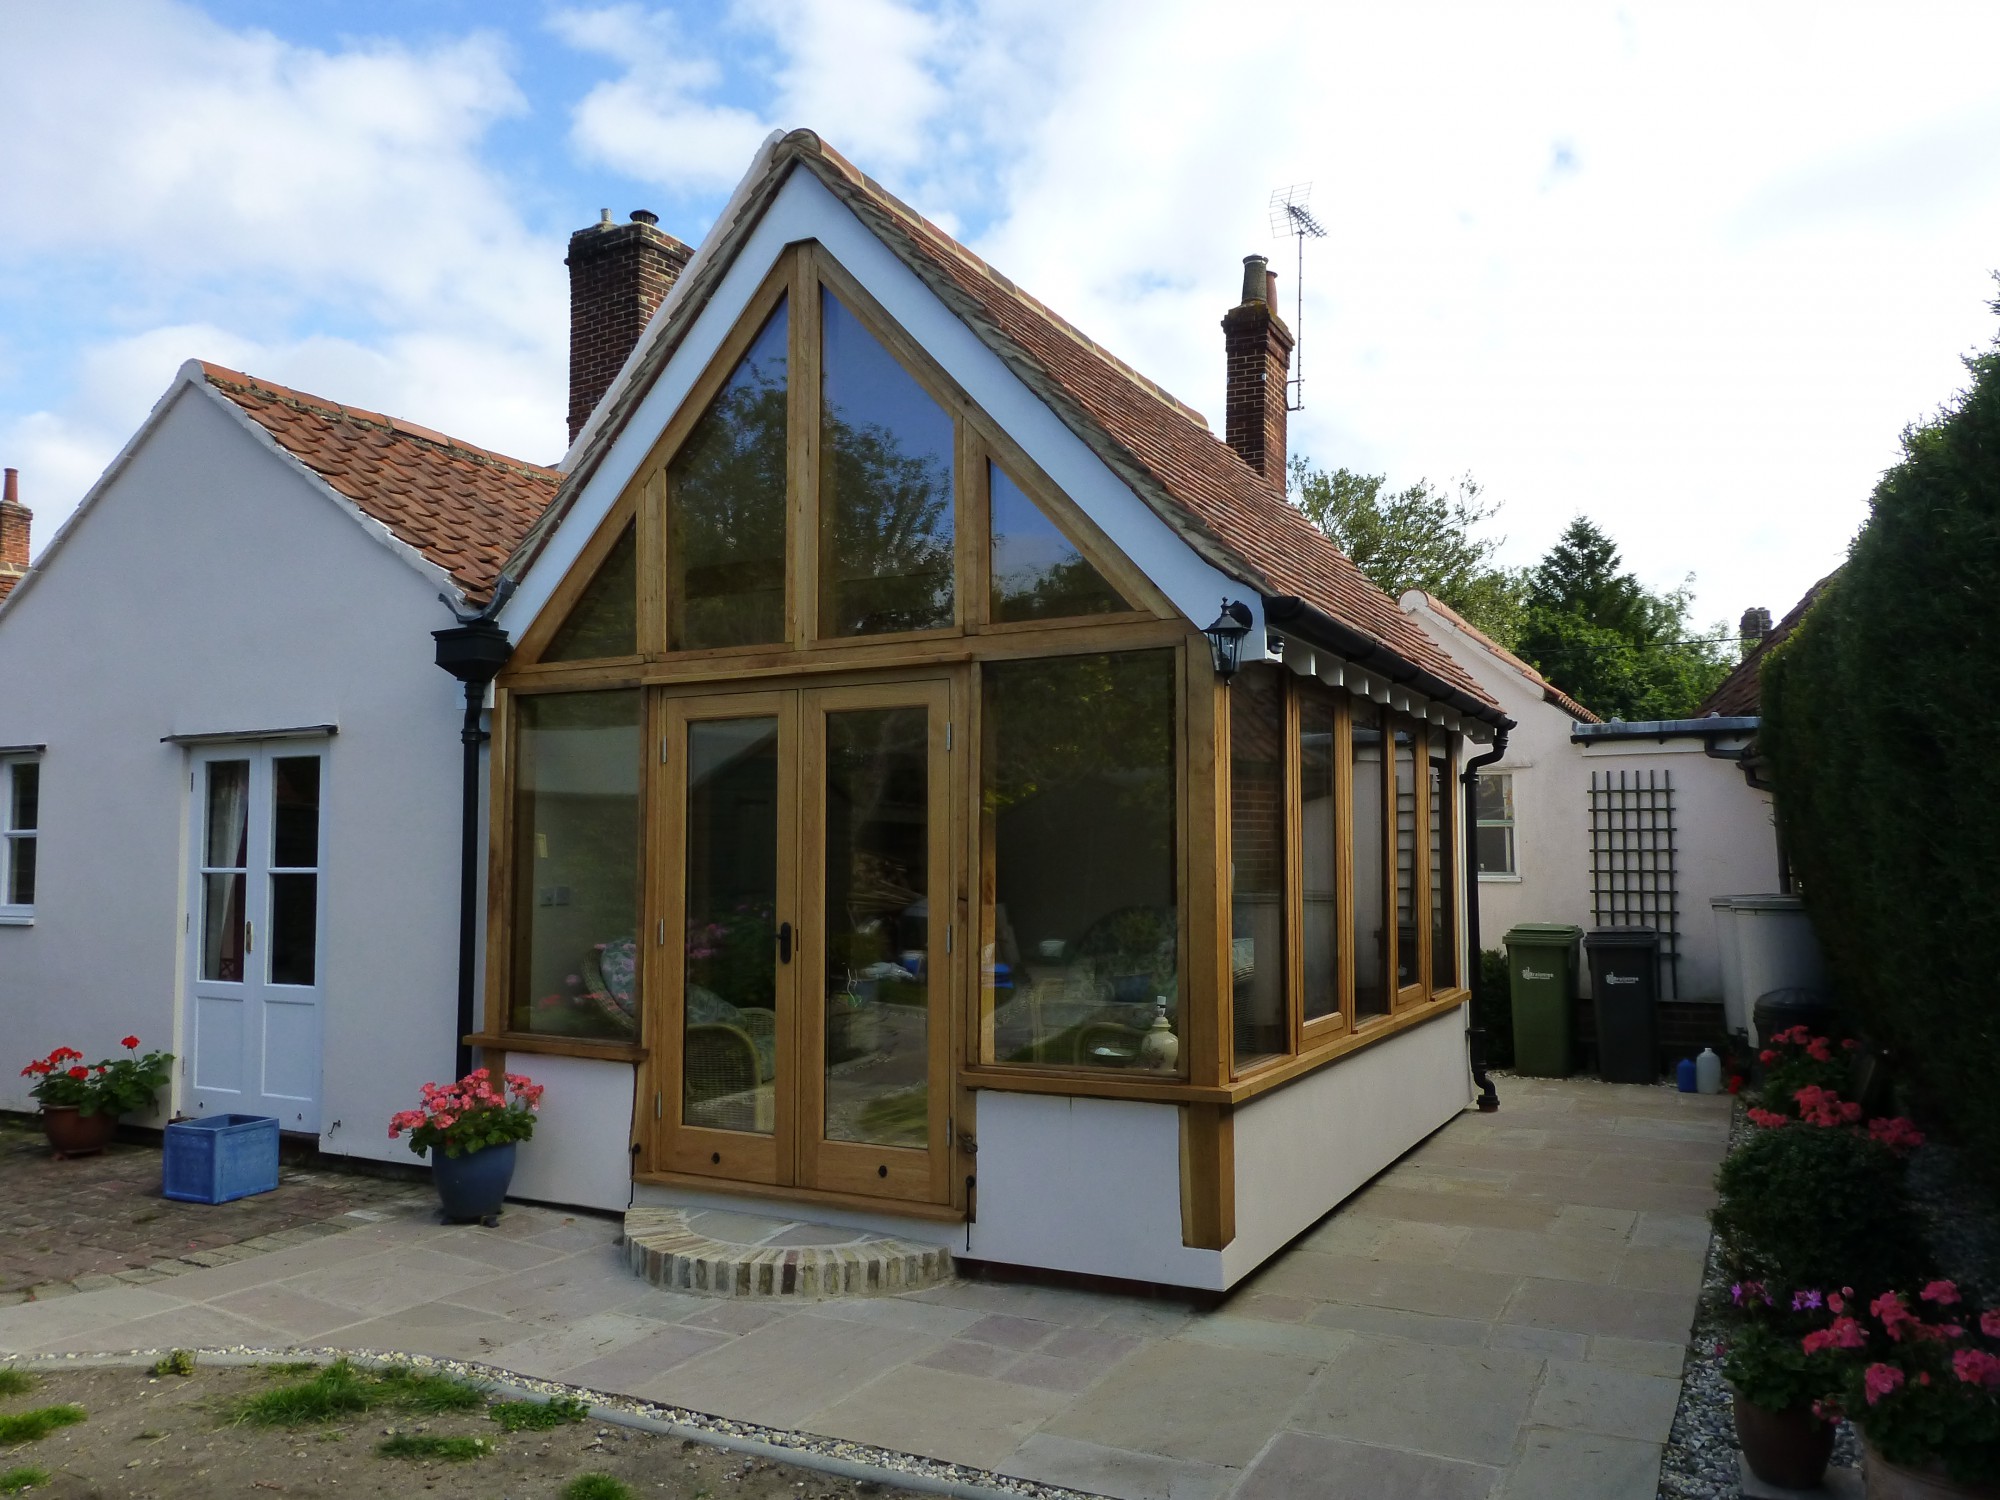 Holy Cottage extension